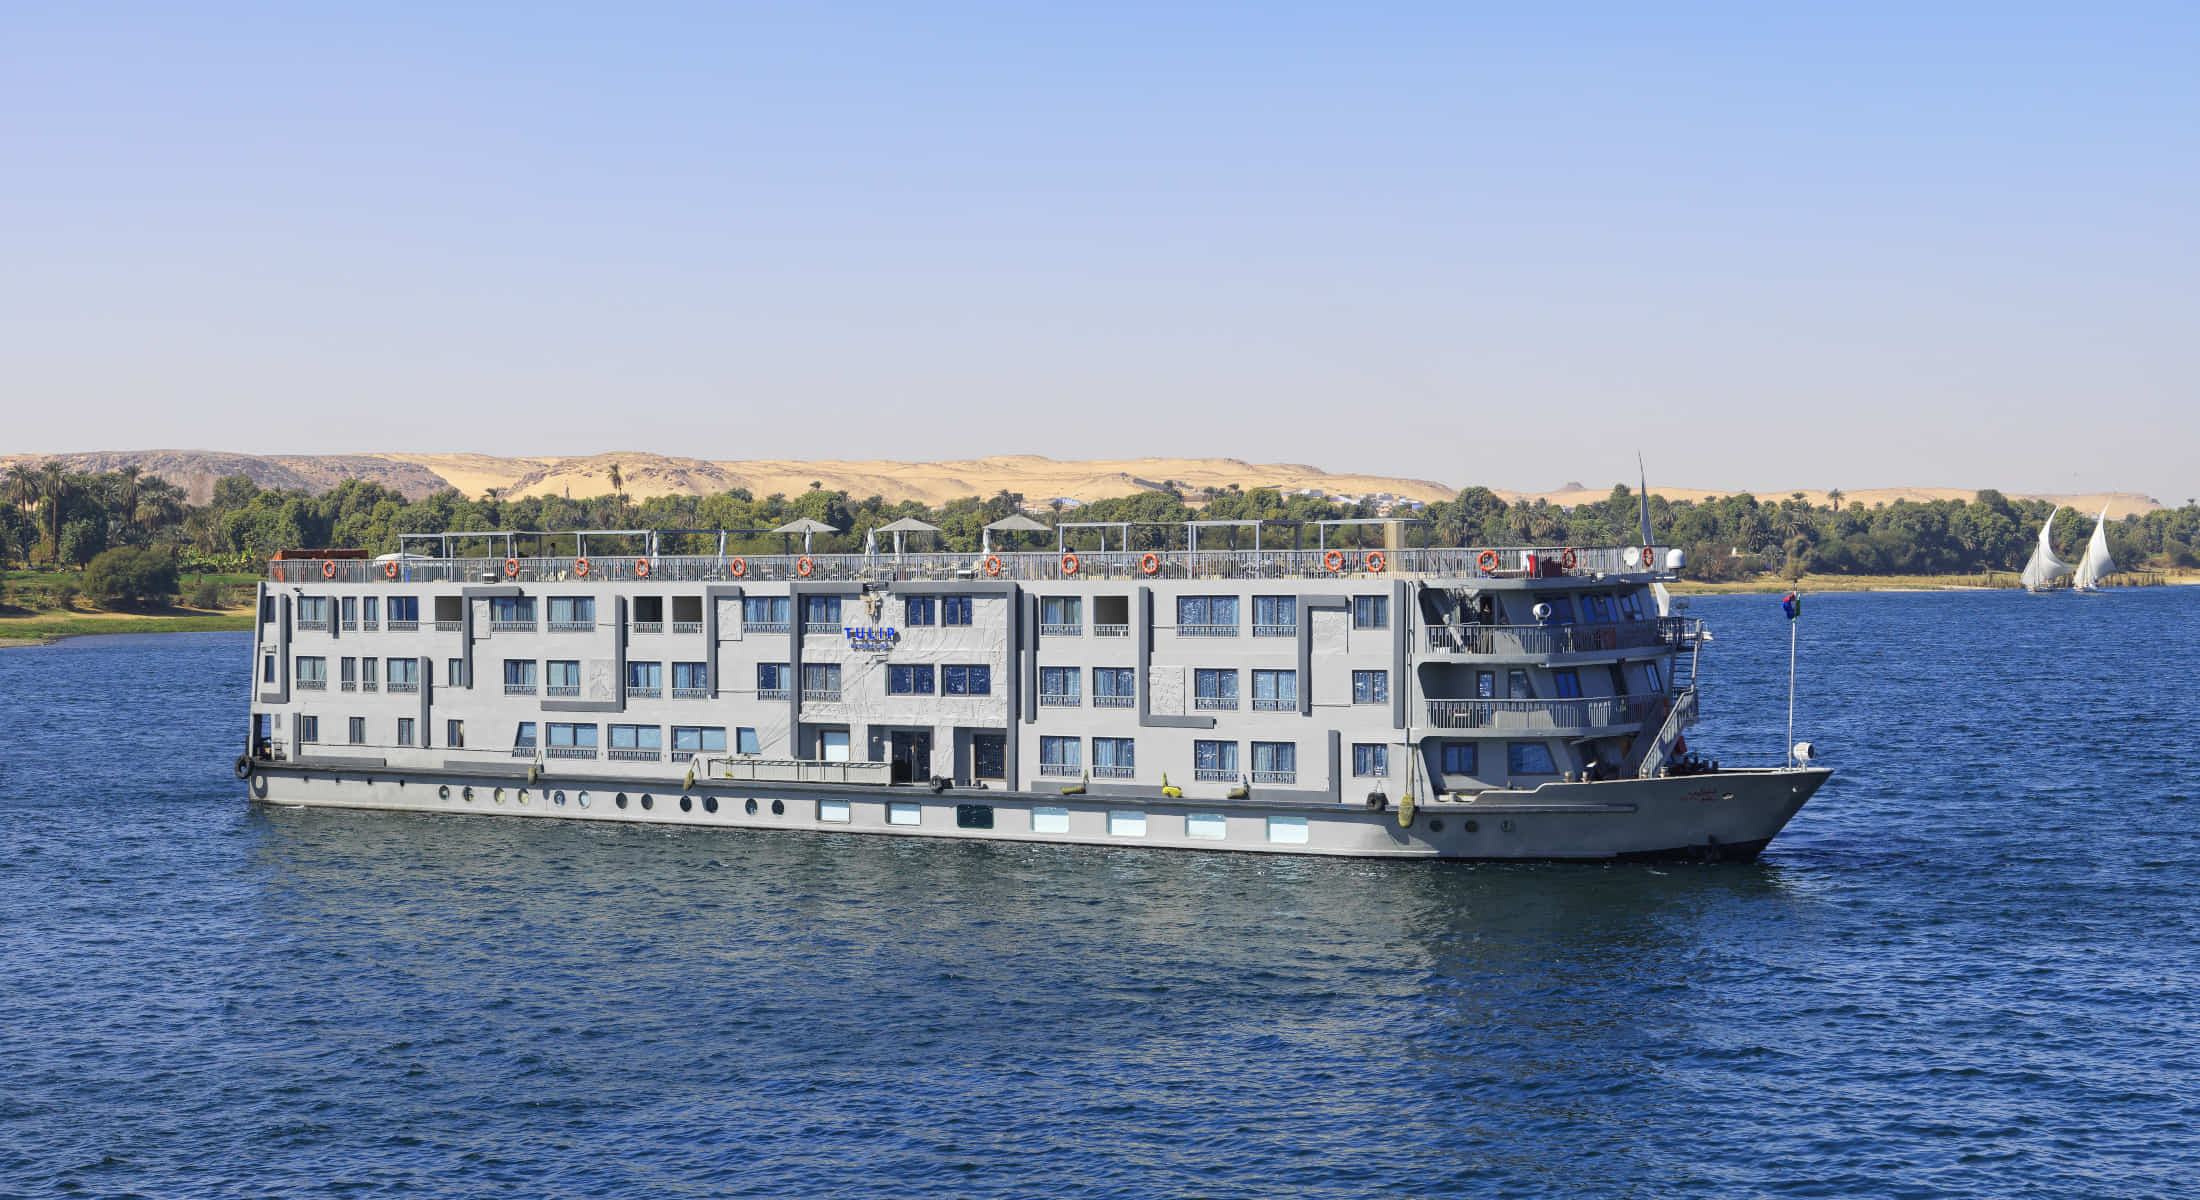 If You Are Looking For A Relaxing Break Look No Further Than A Nile Cruise